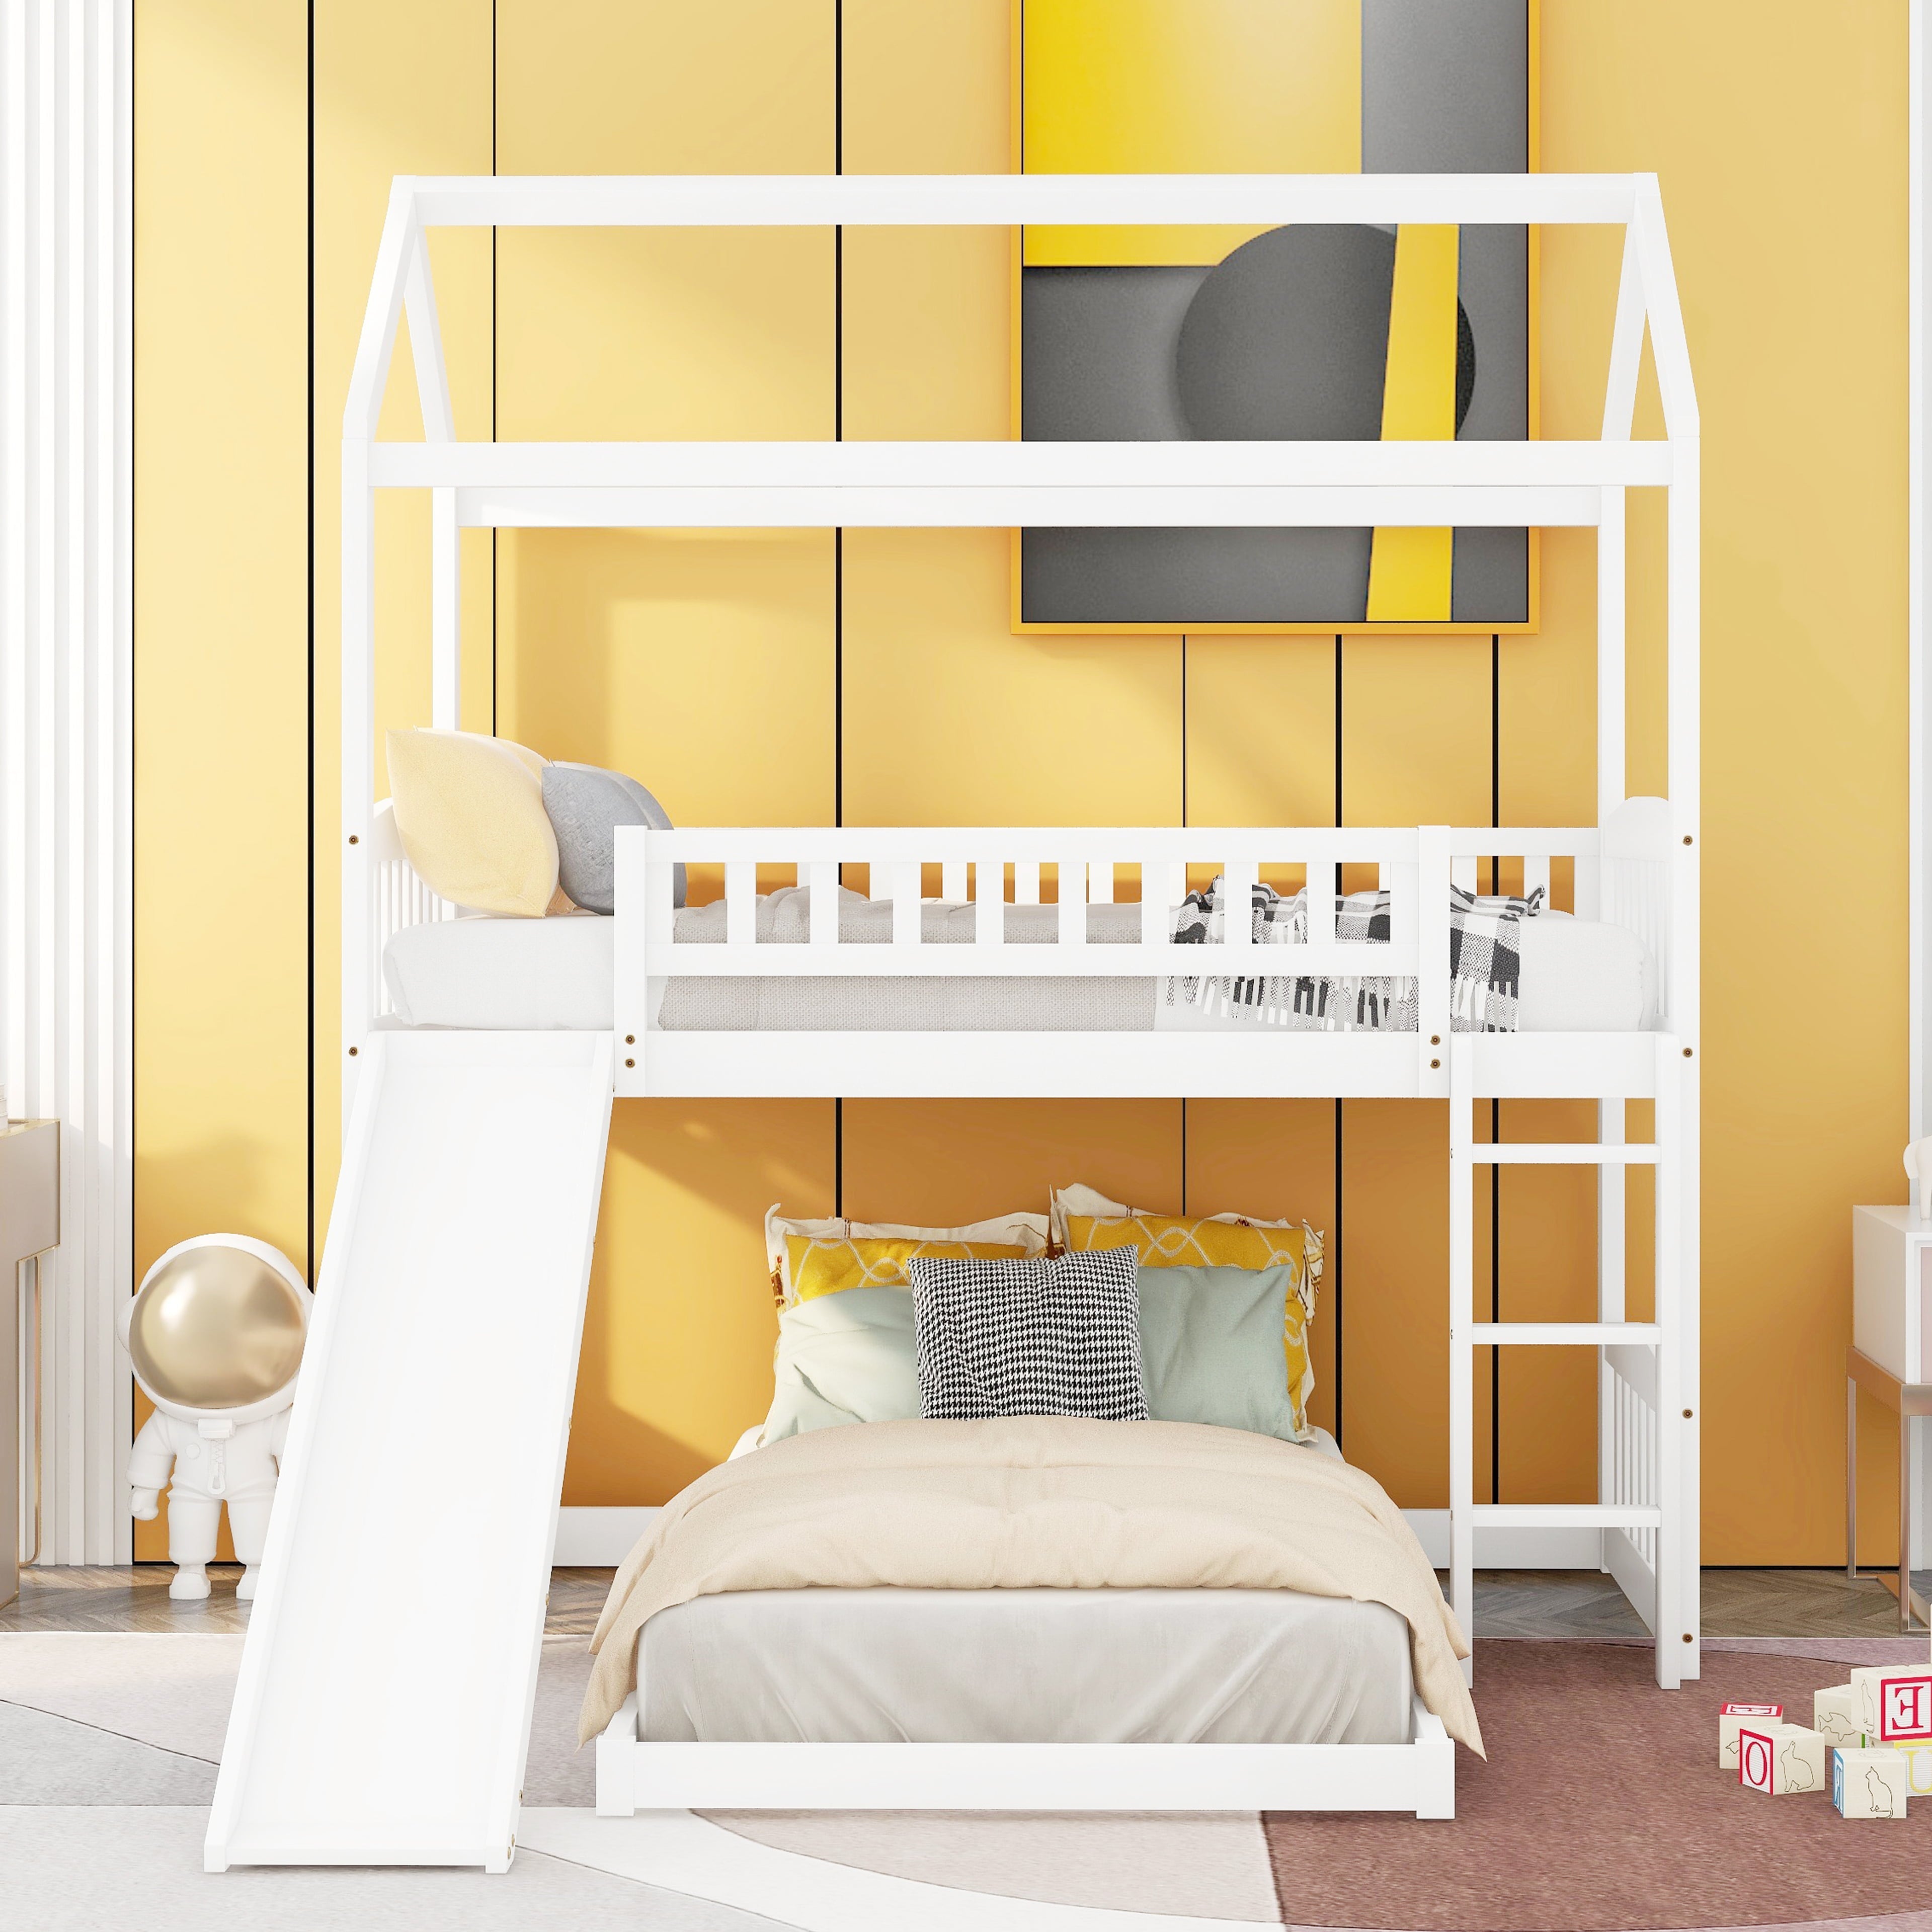 Bellemave House Bunk Bed with Slide, Wood Twin Over Twin L-Shape Bunk Bed Frame with Ladder for Kids Teens (White)